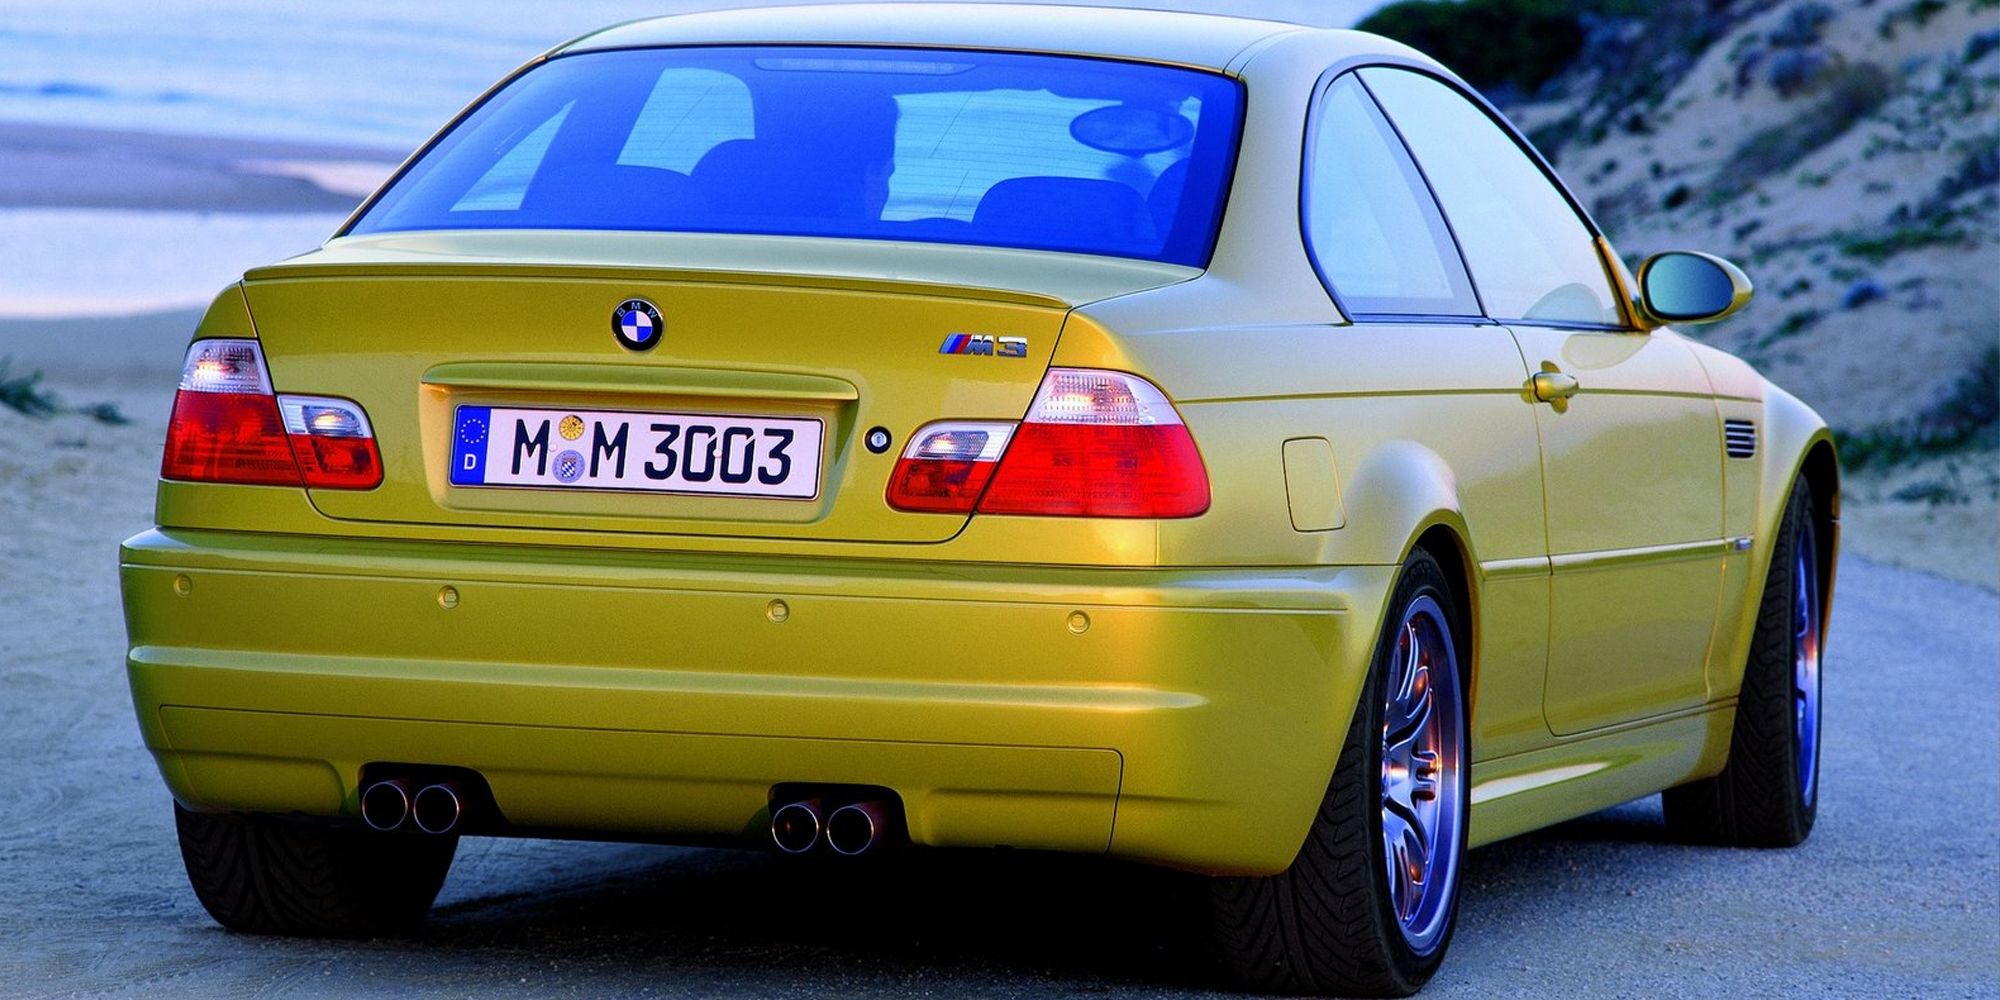 The rear of the E46 M3